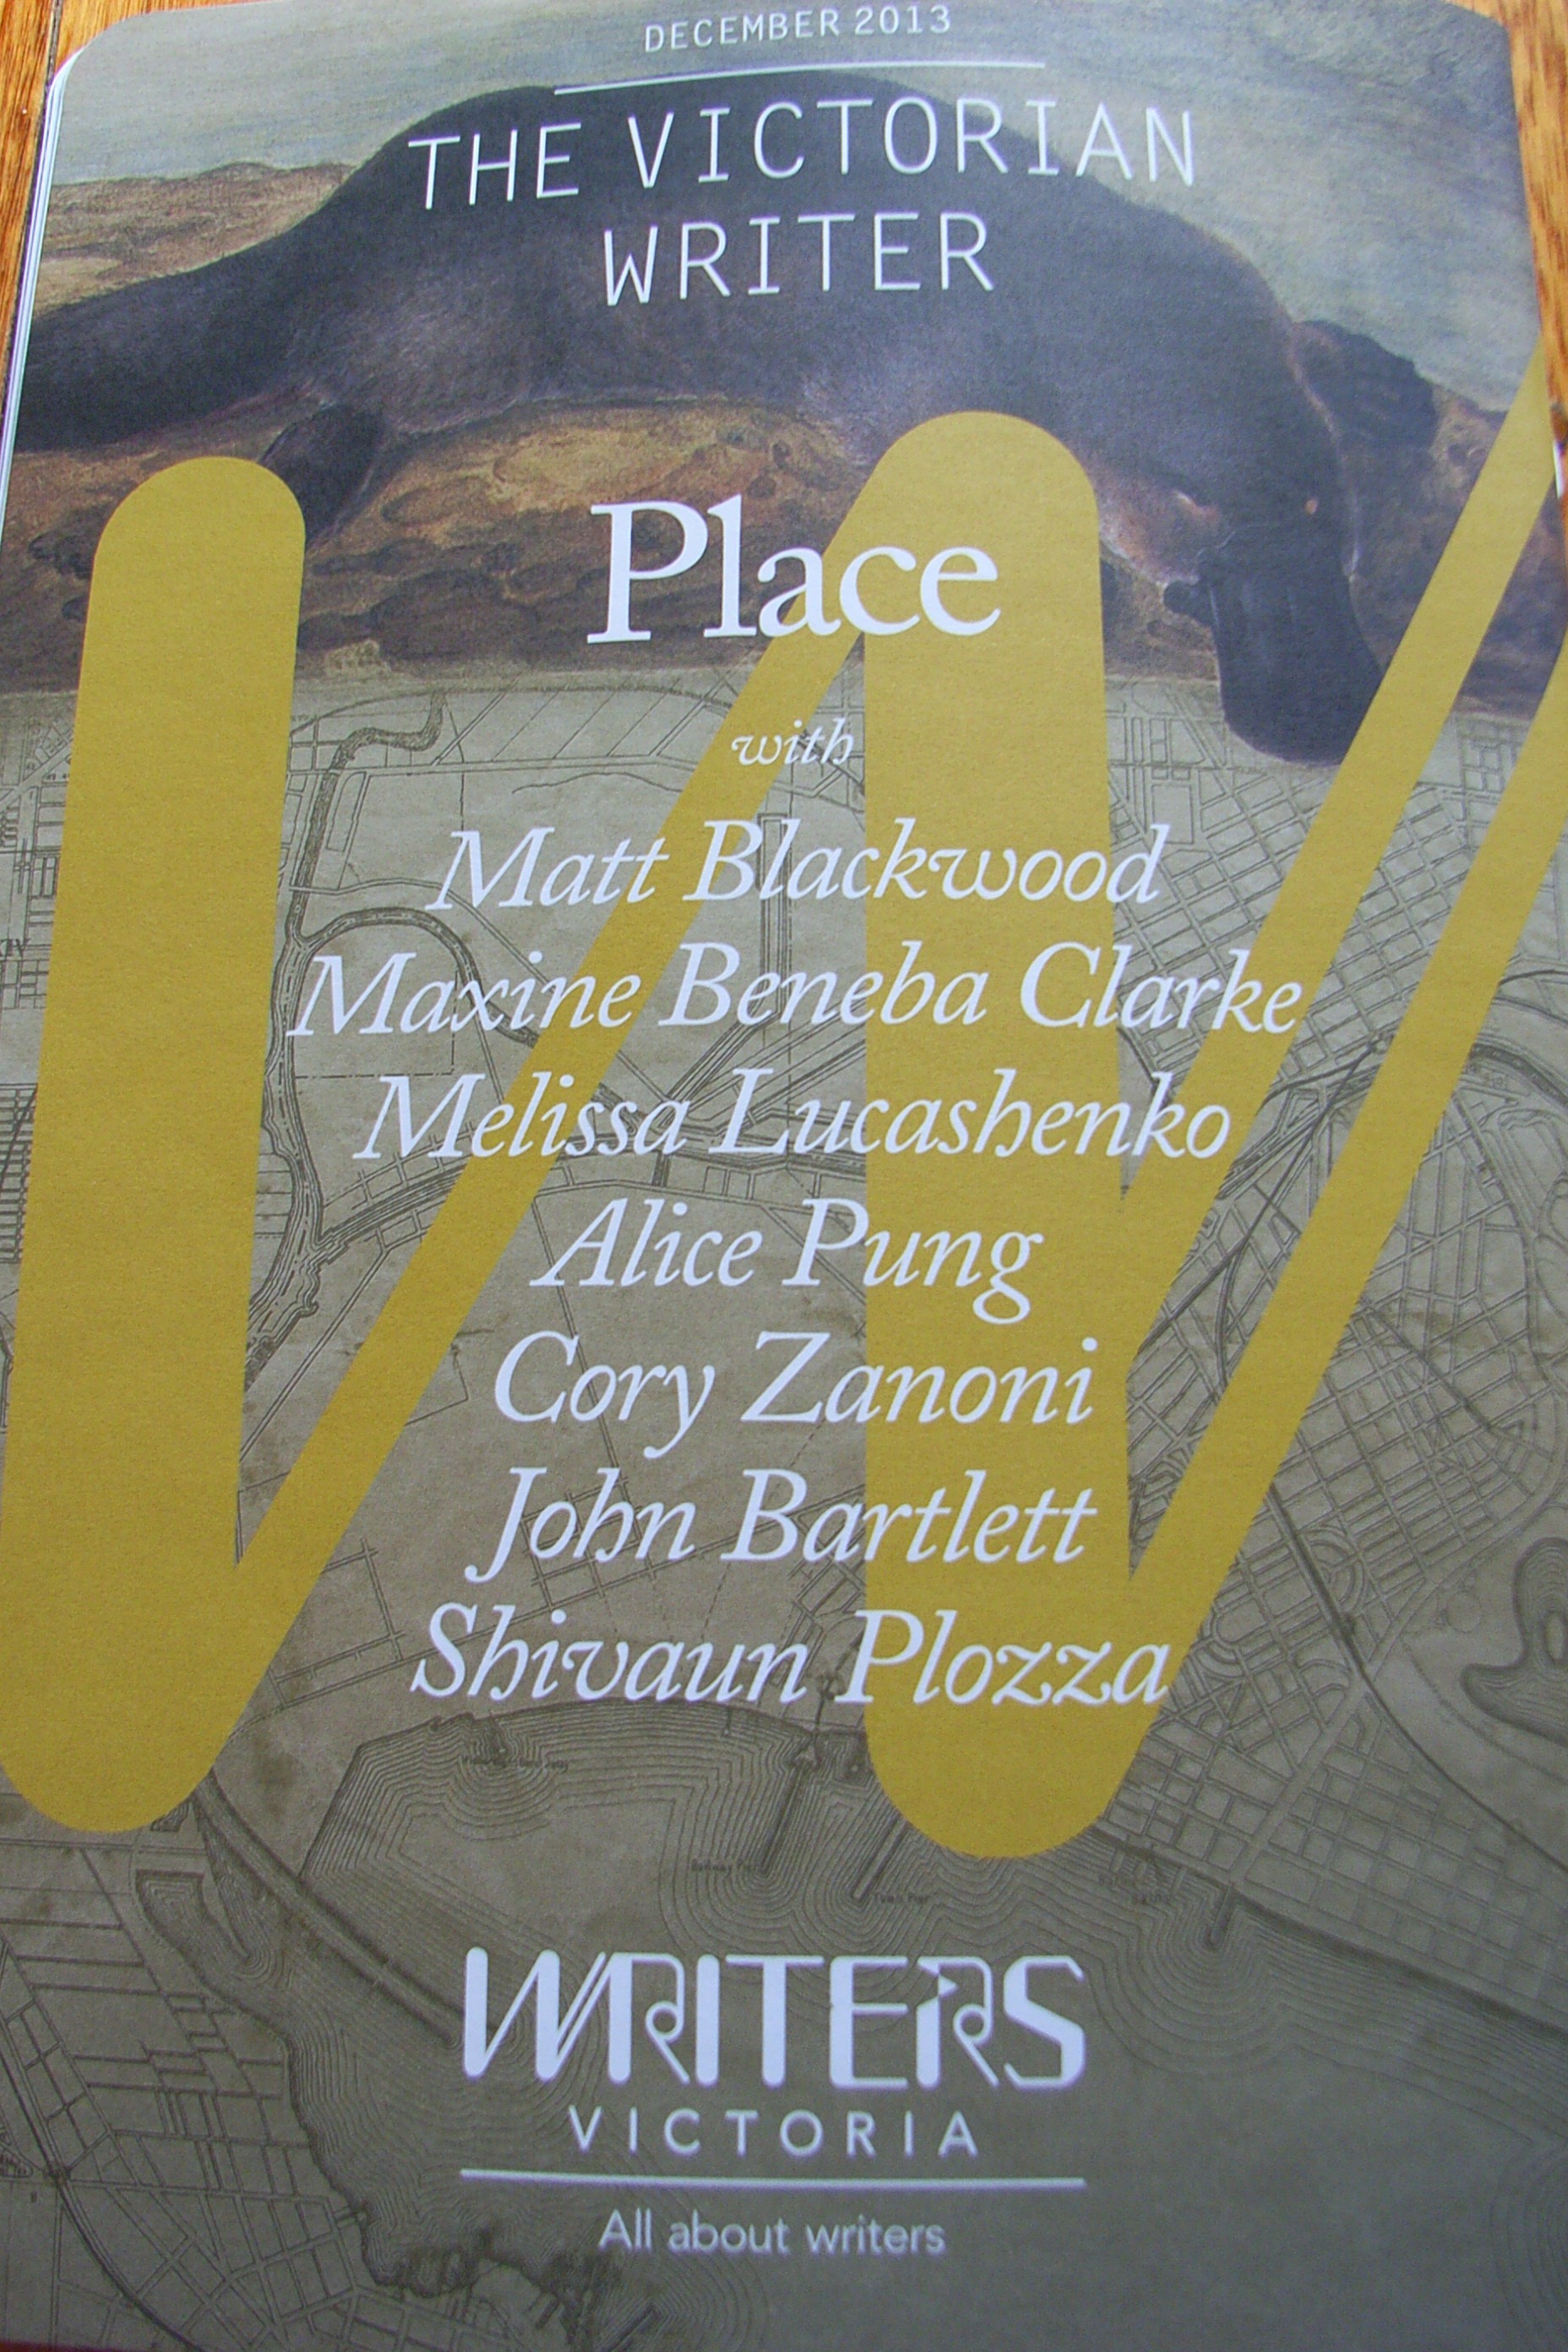 The Lure of Place (published in the December 2013 issue of ‘The Victorian Writer’)